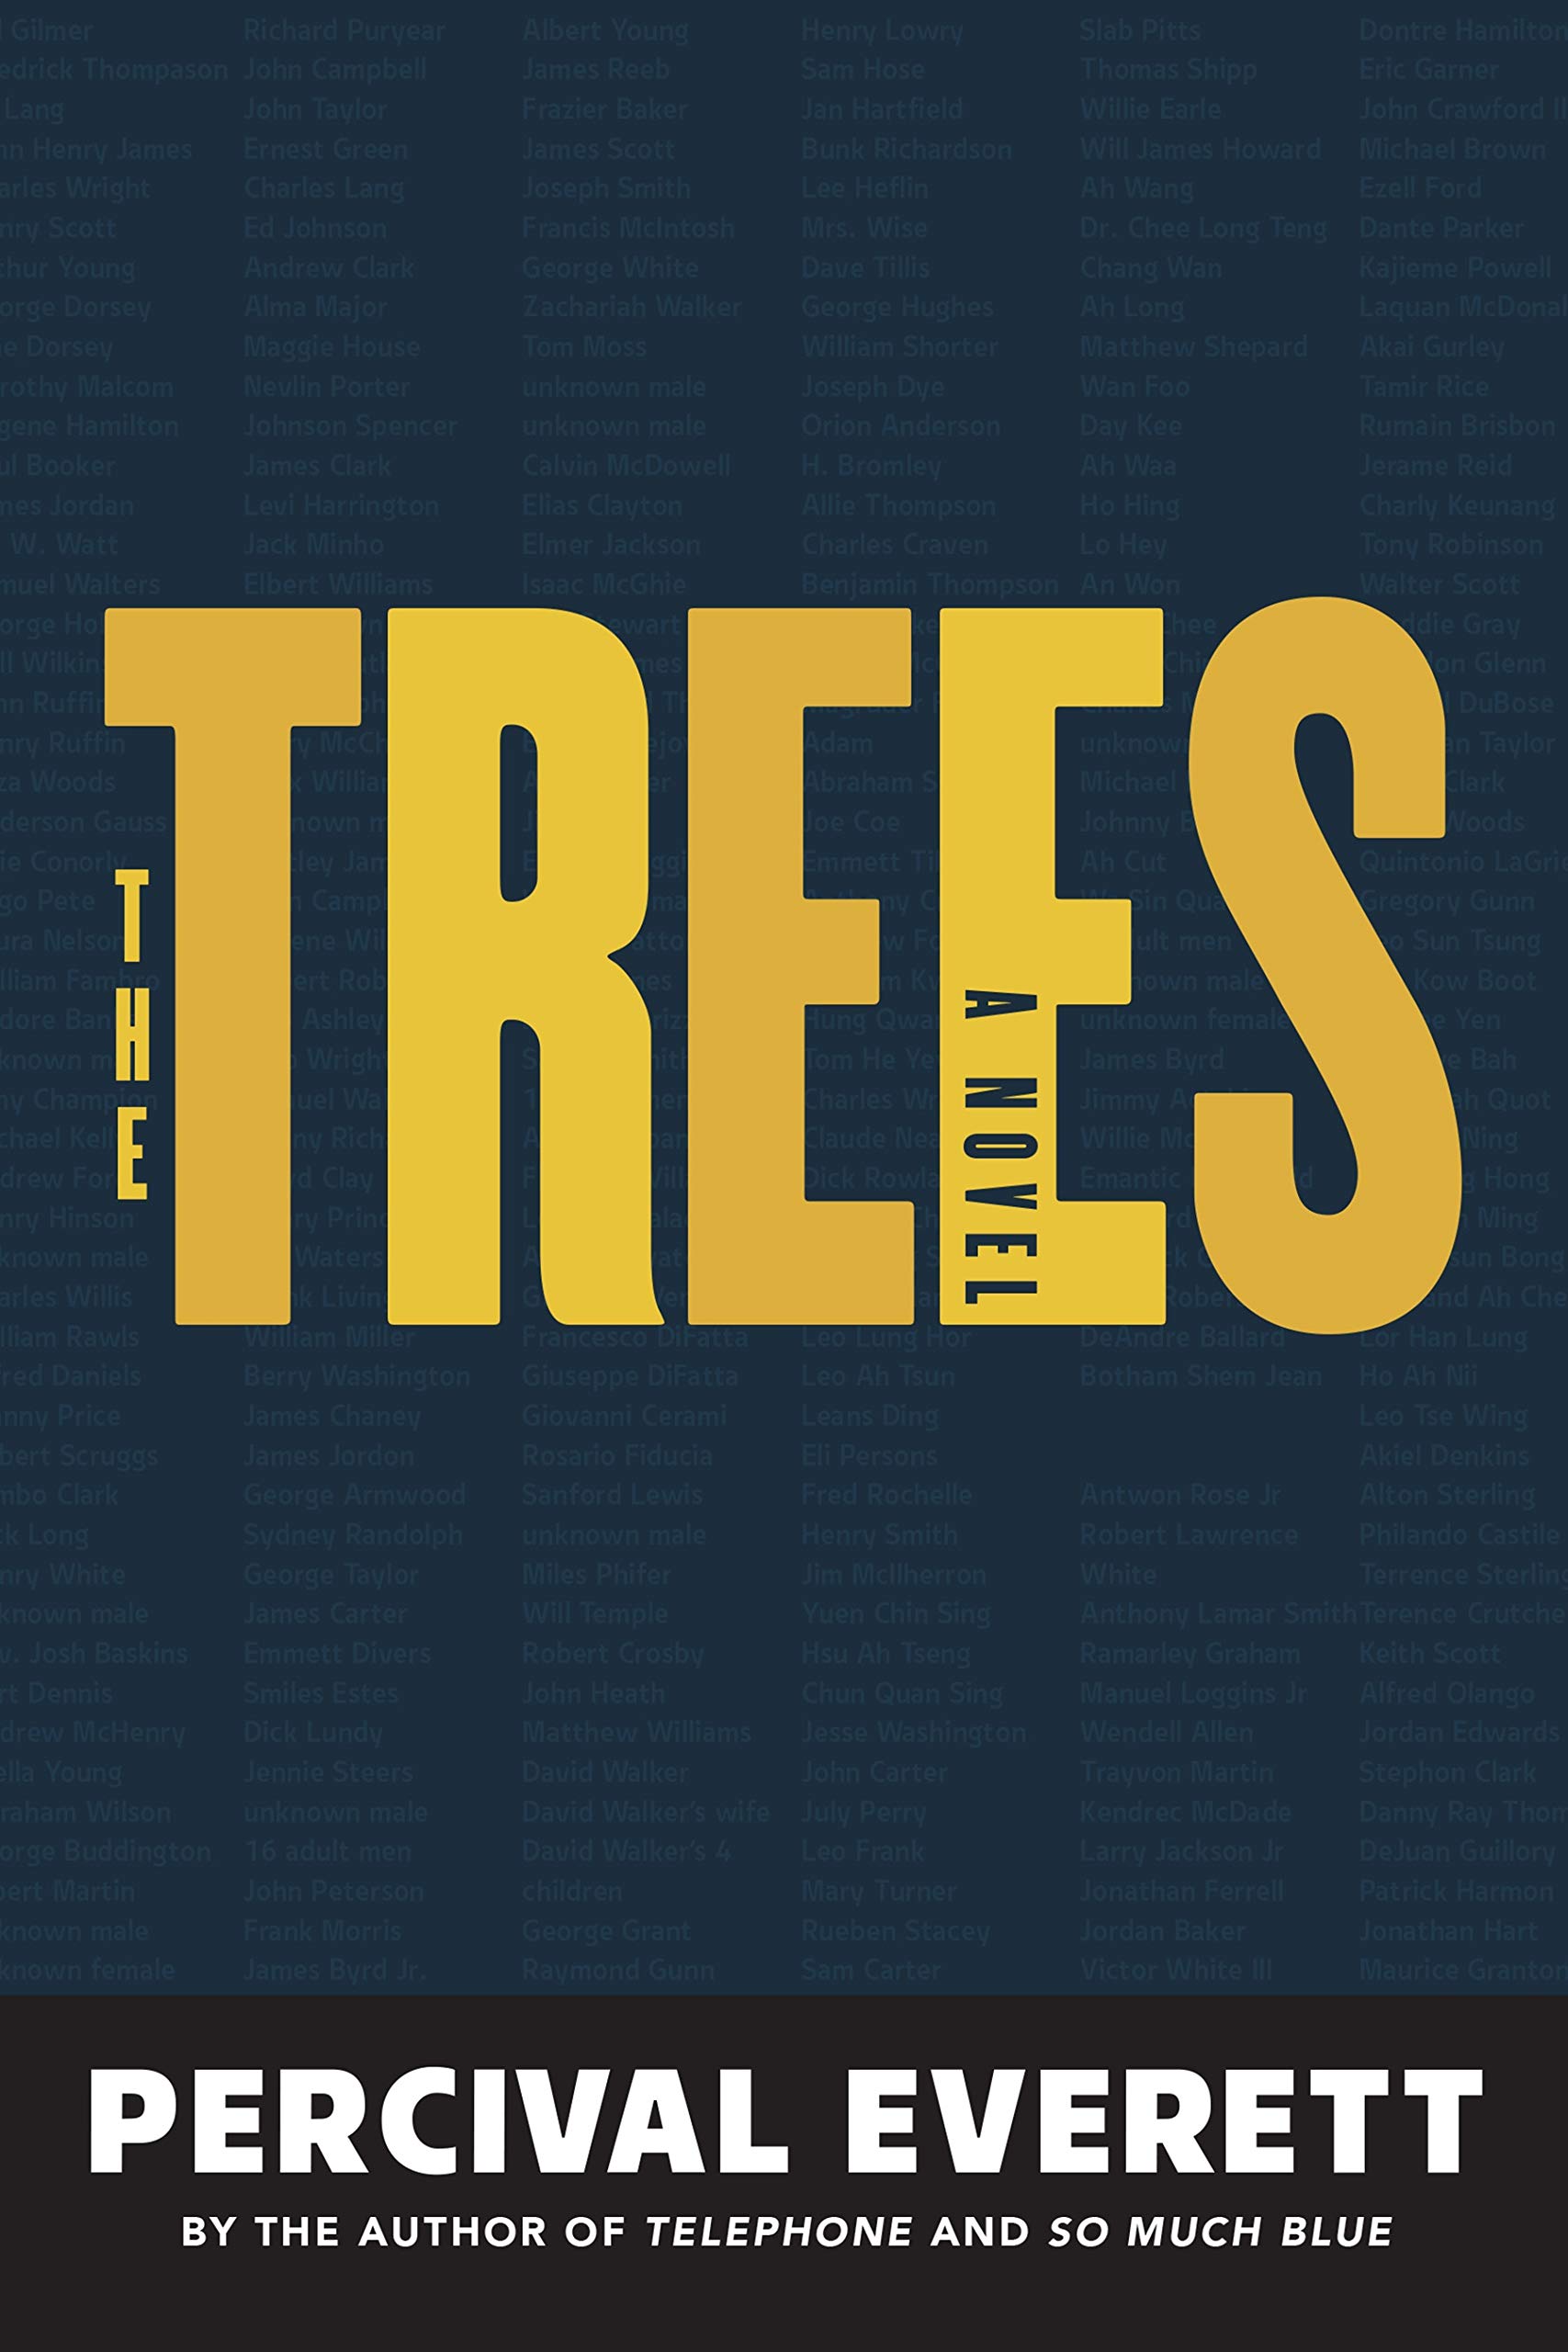 The cover of The Trees